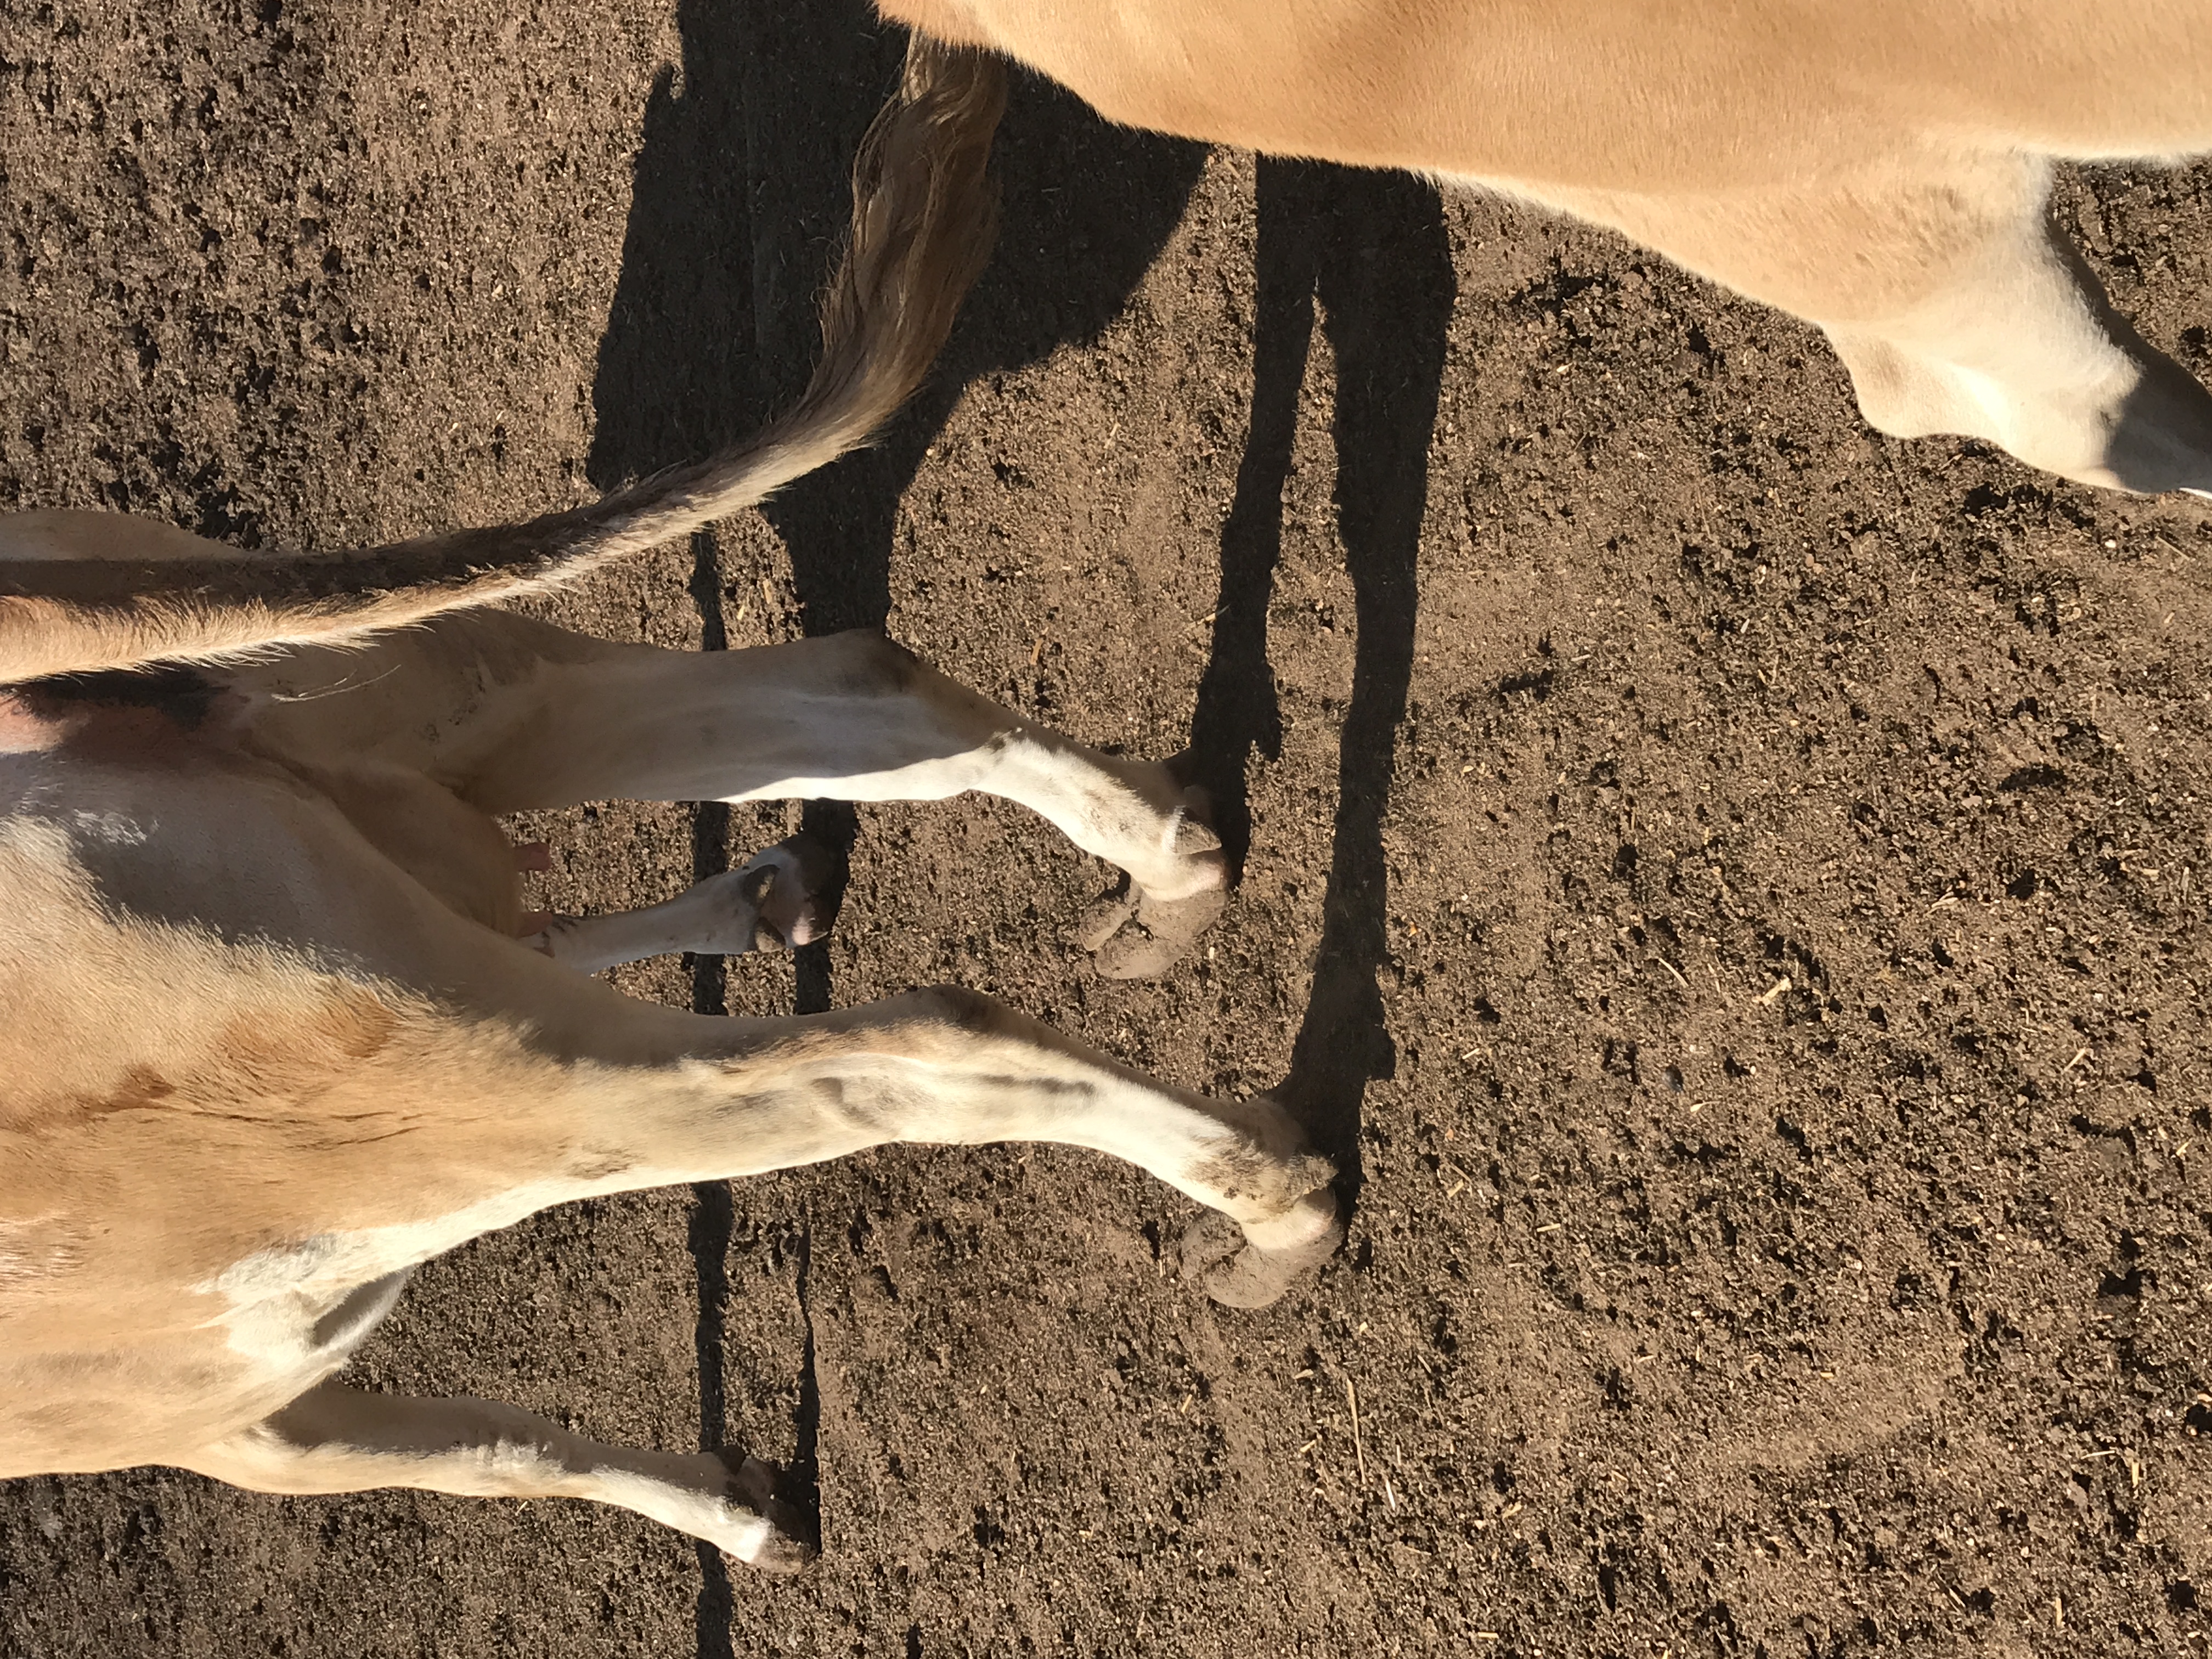 Cow with increased keratogenesis causing long hooves